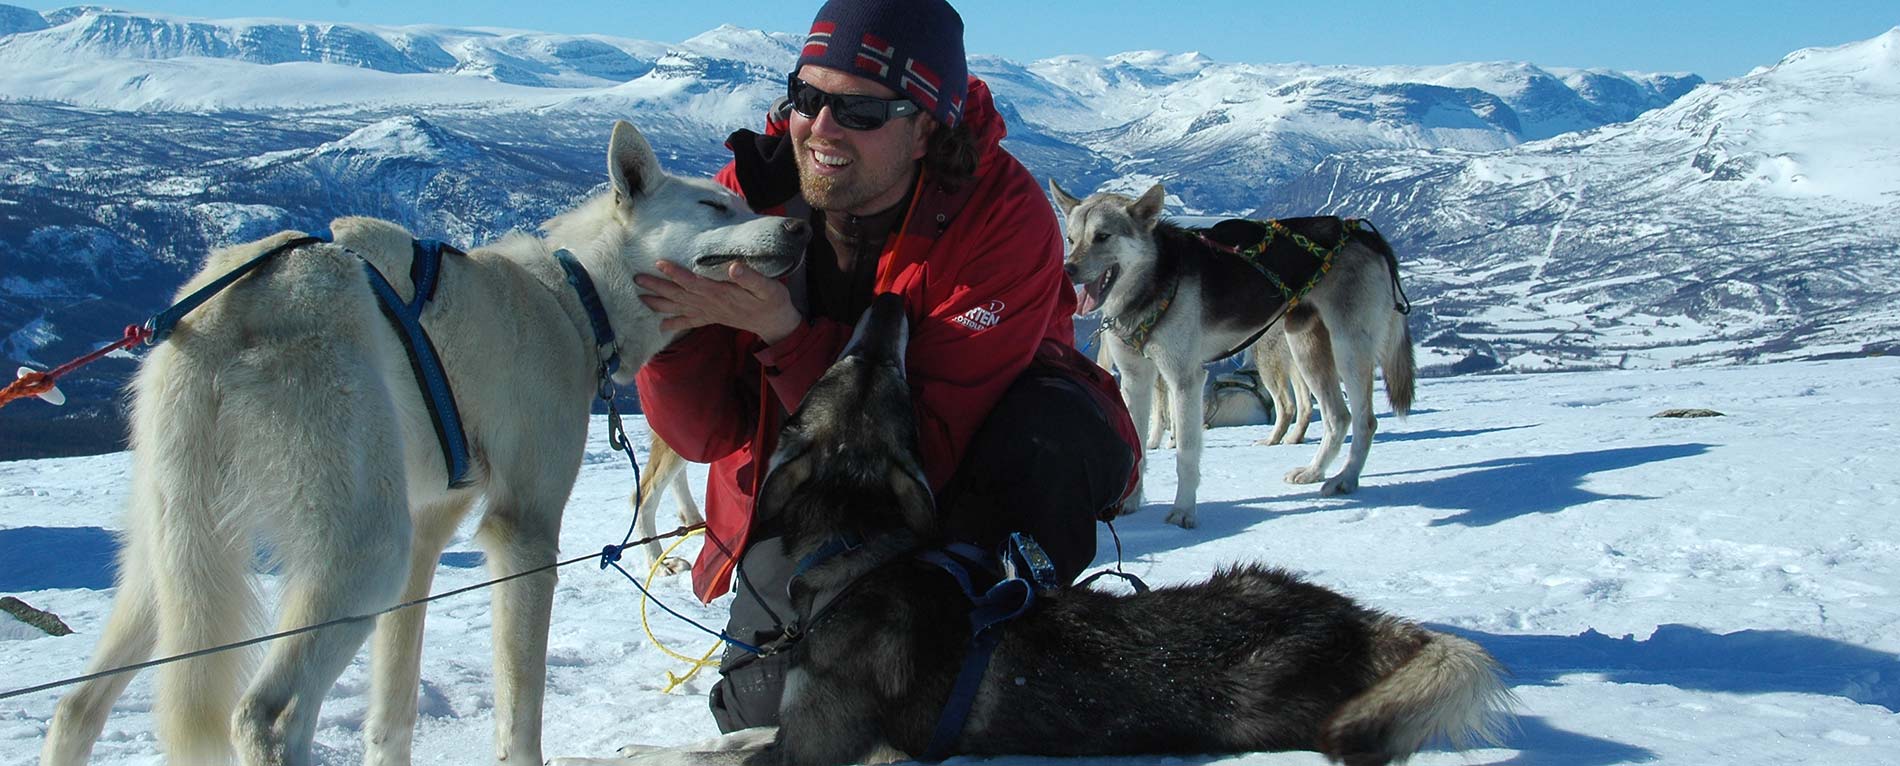 All about sled dogs